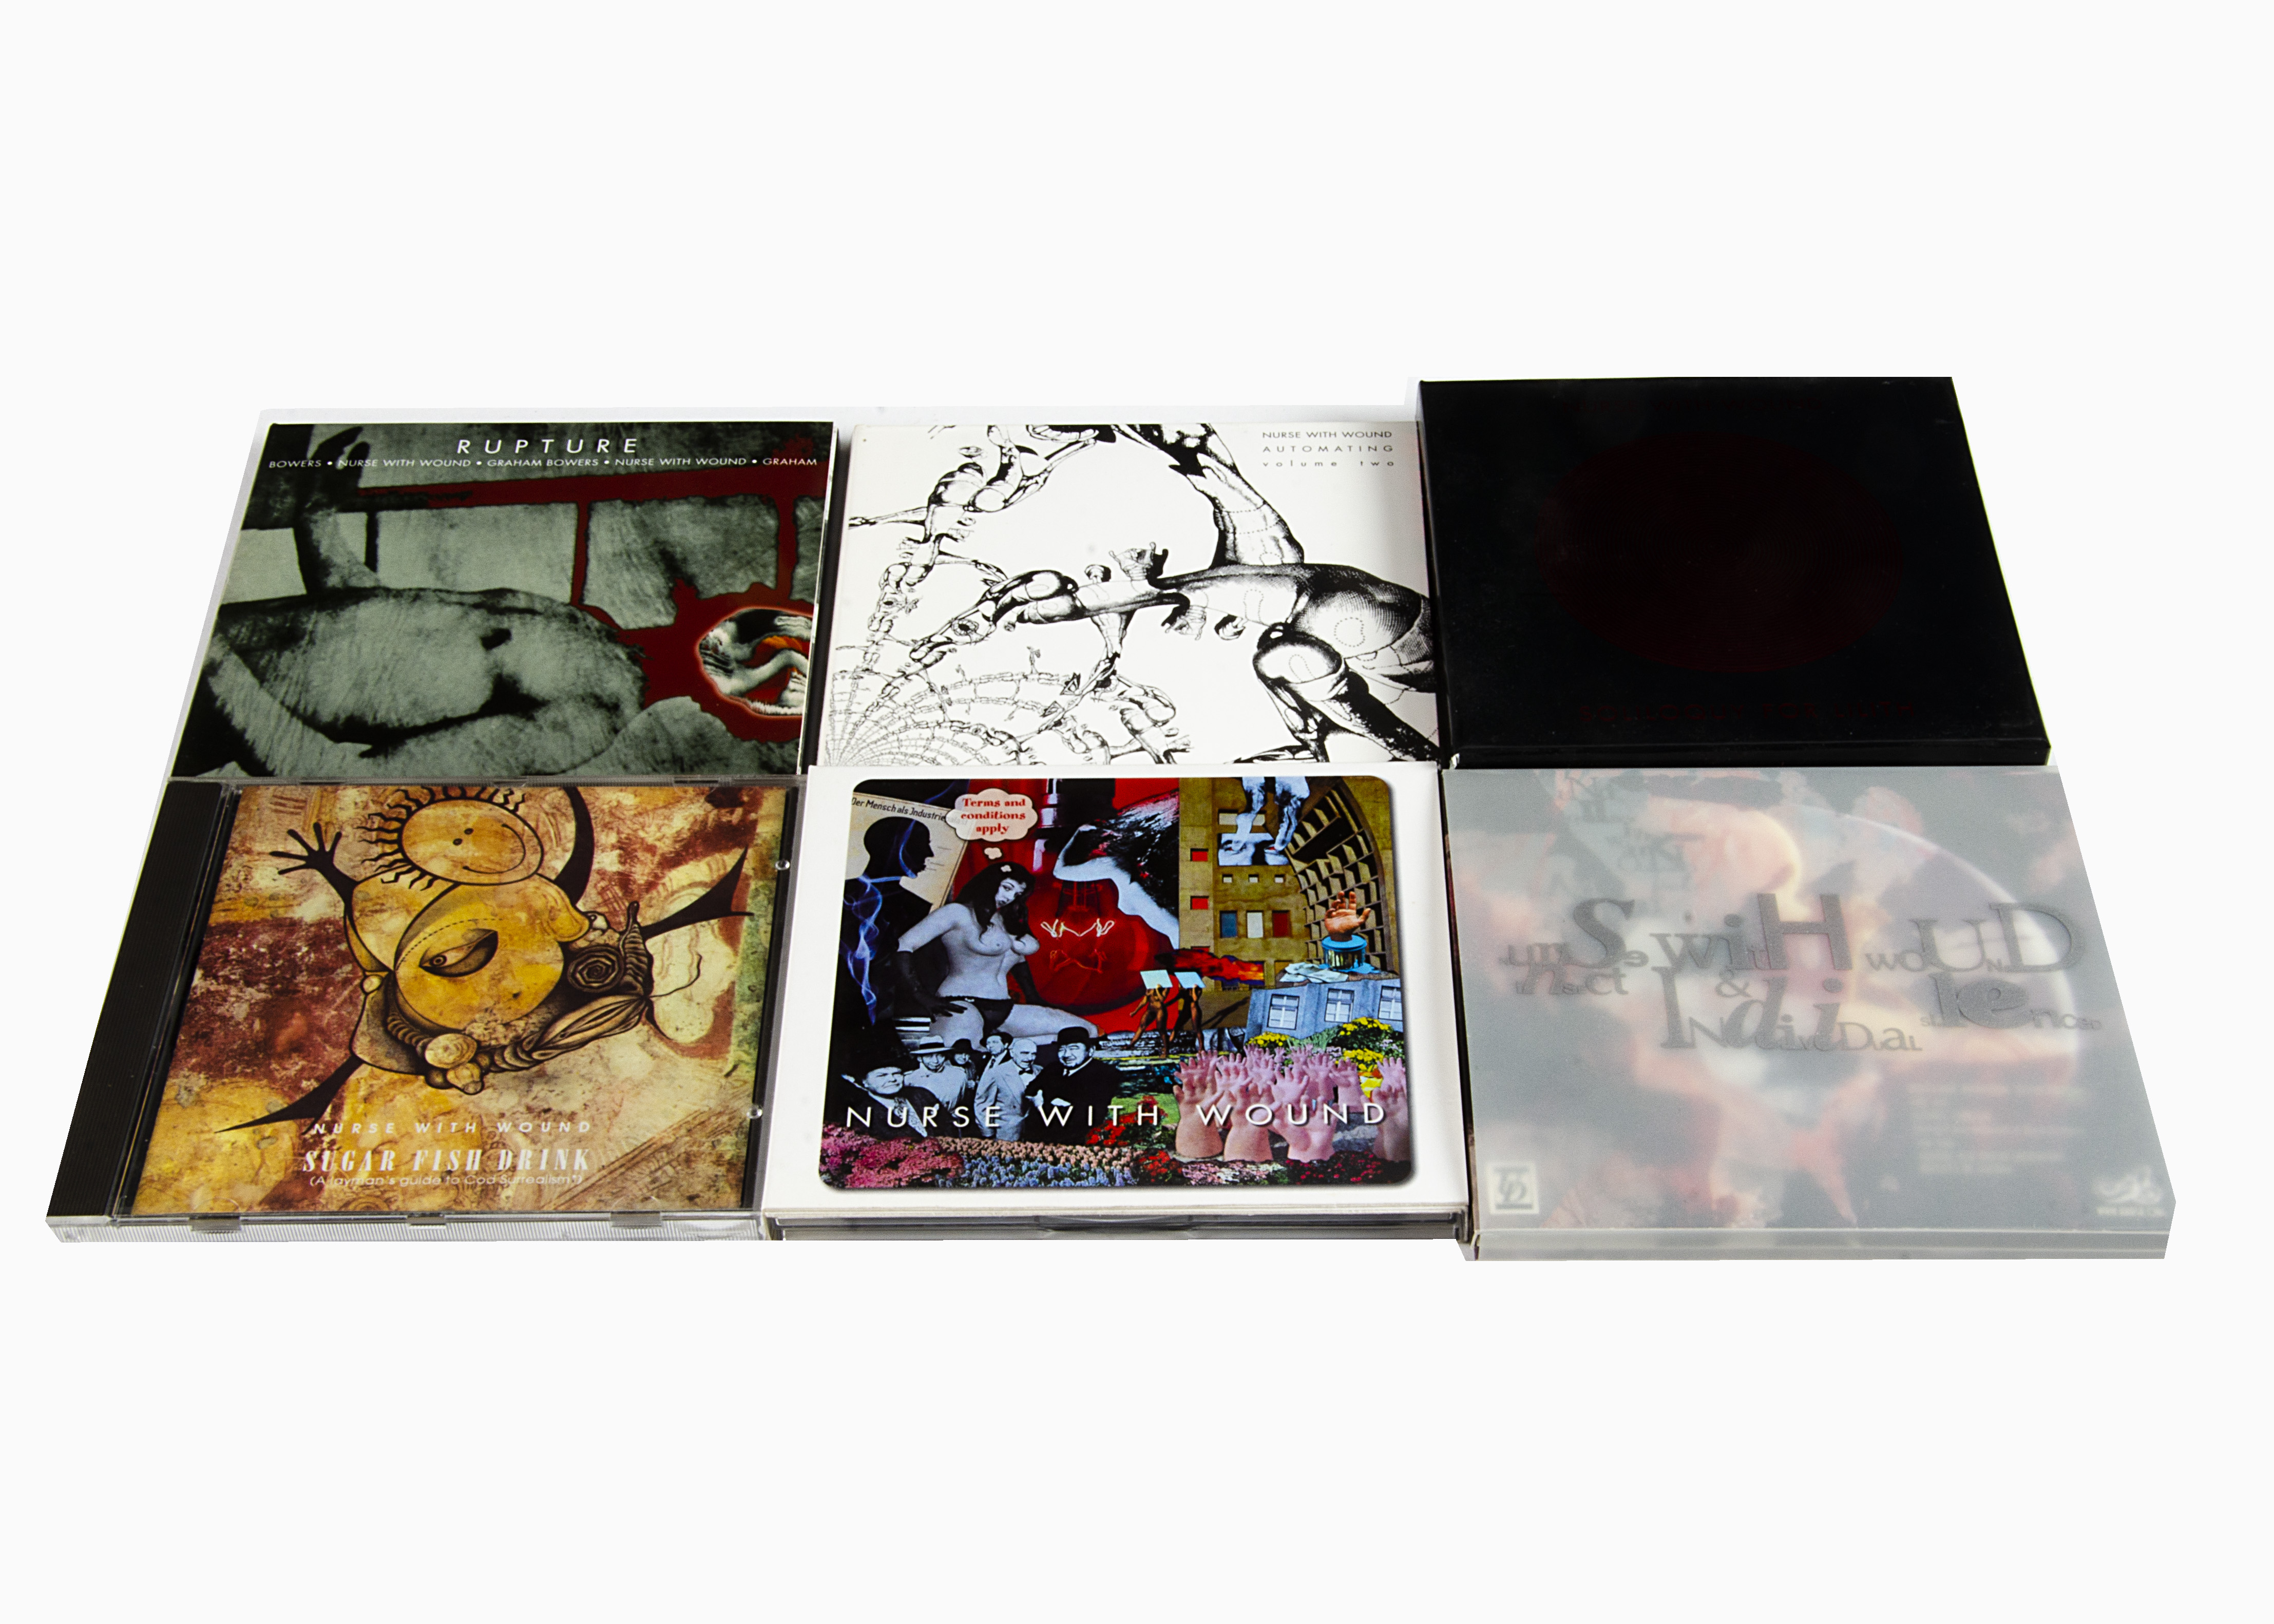 Nurse With Wound CDs twenty CDs and a box set with titles including Soliloquy For Lilith (Box),